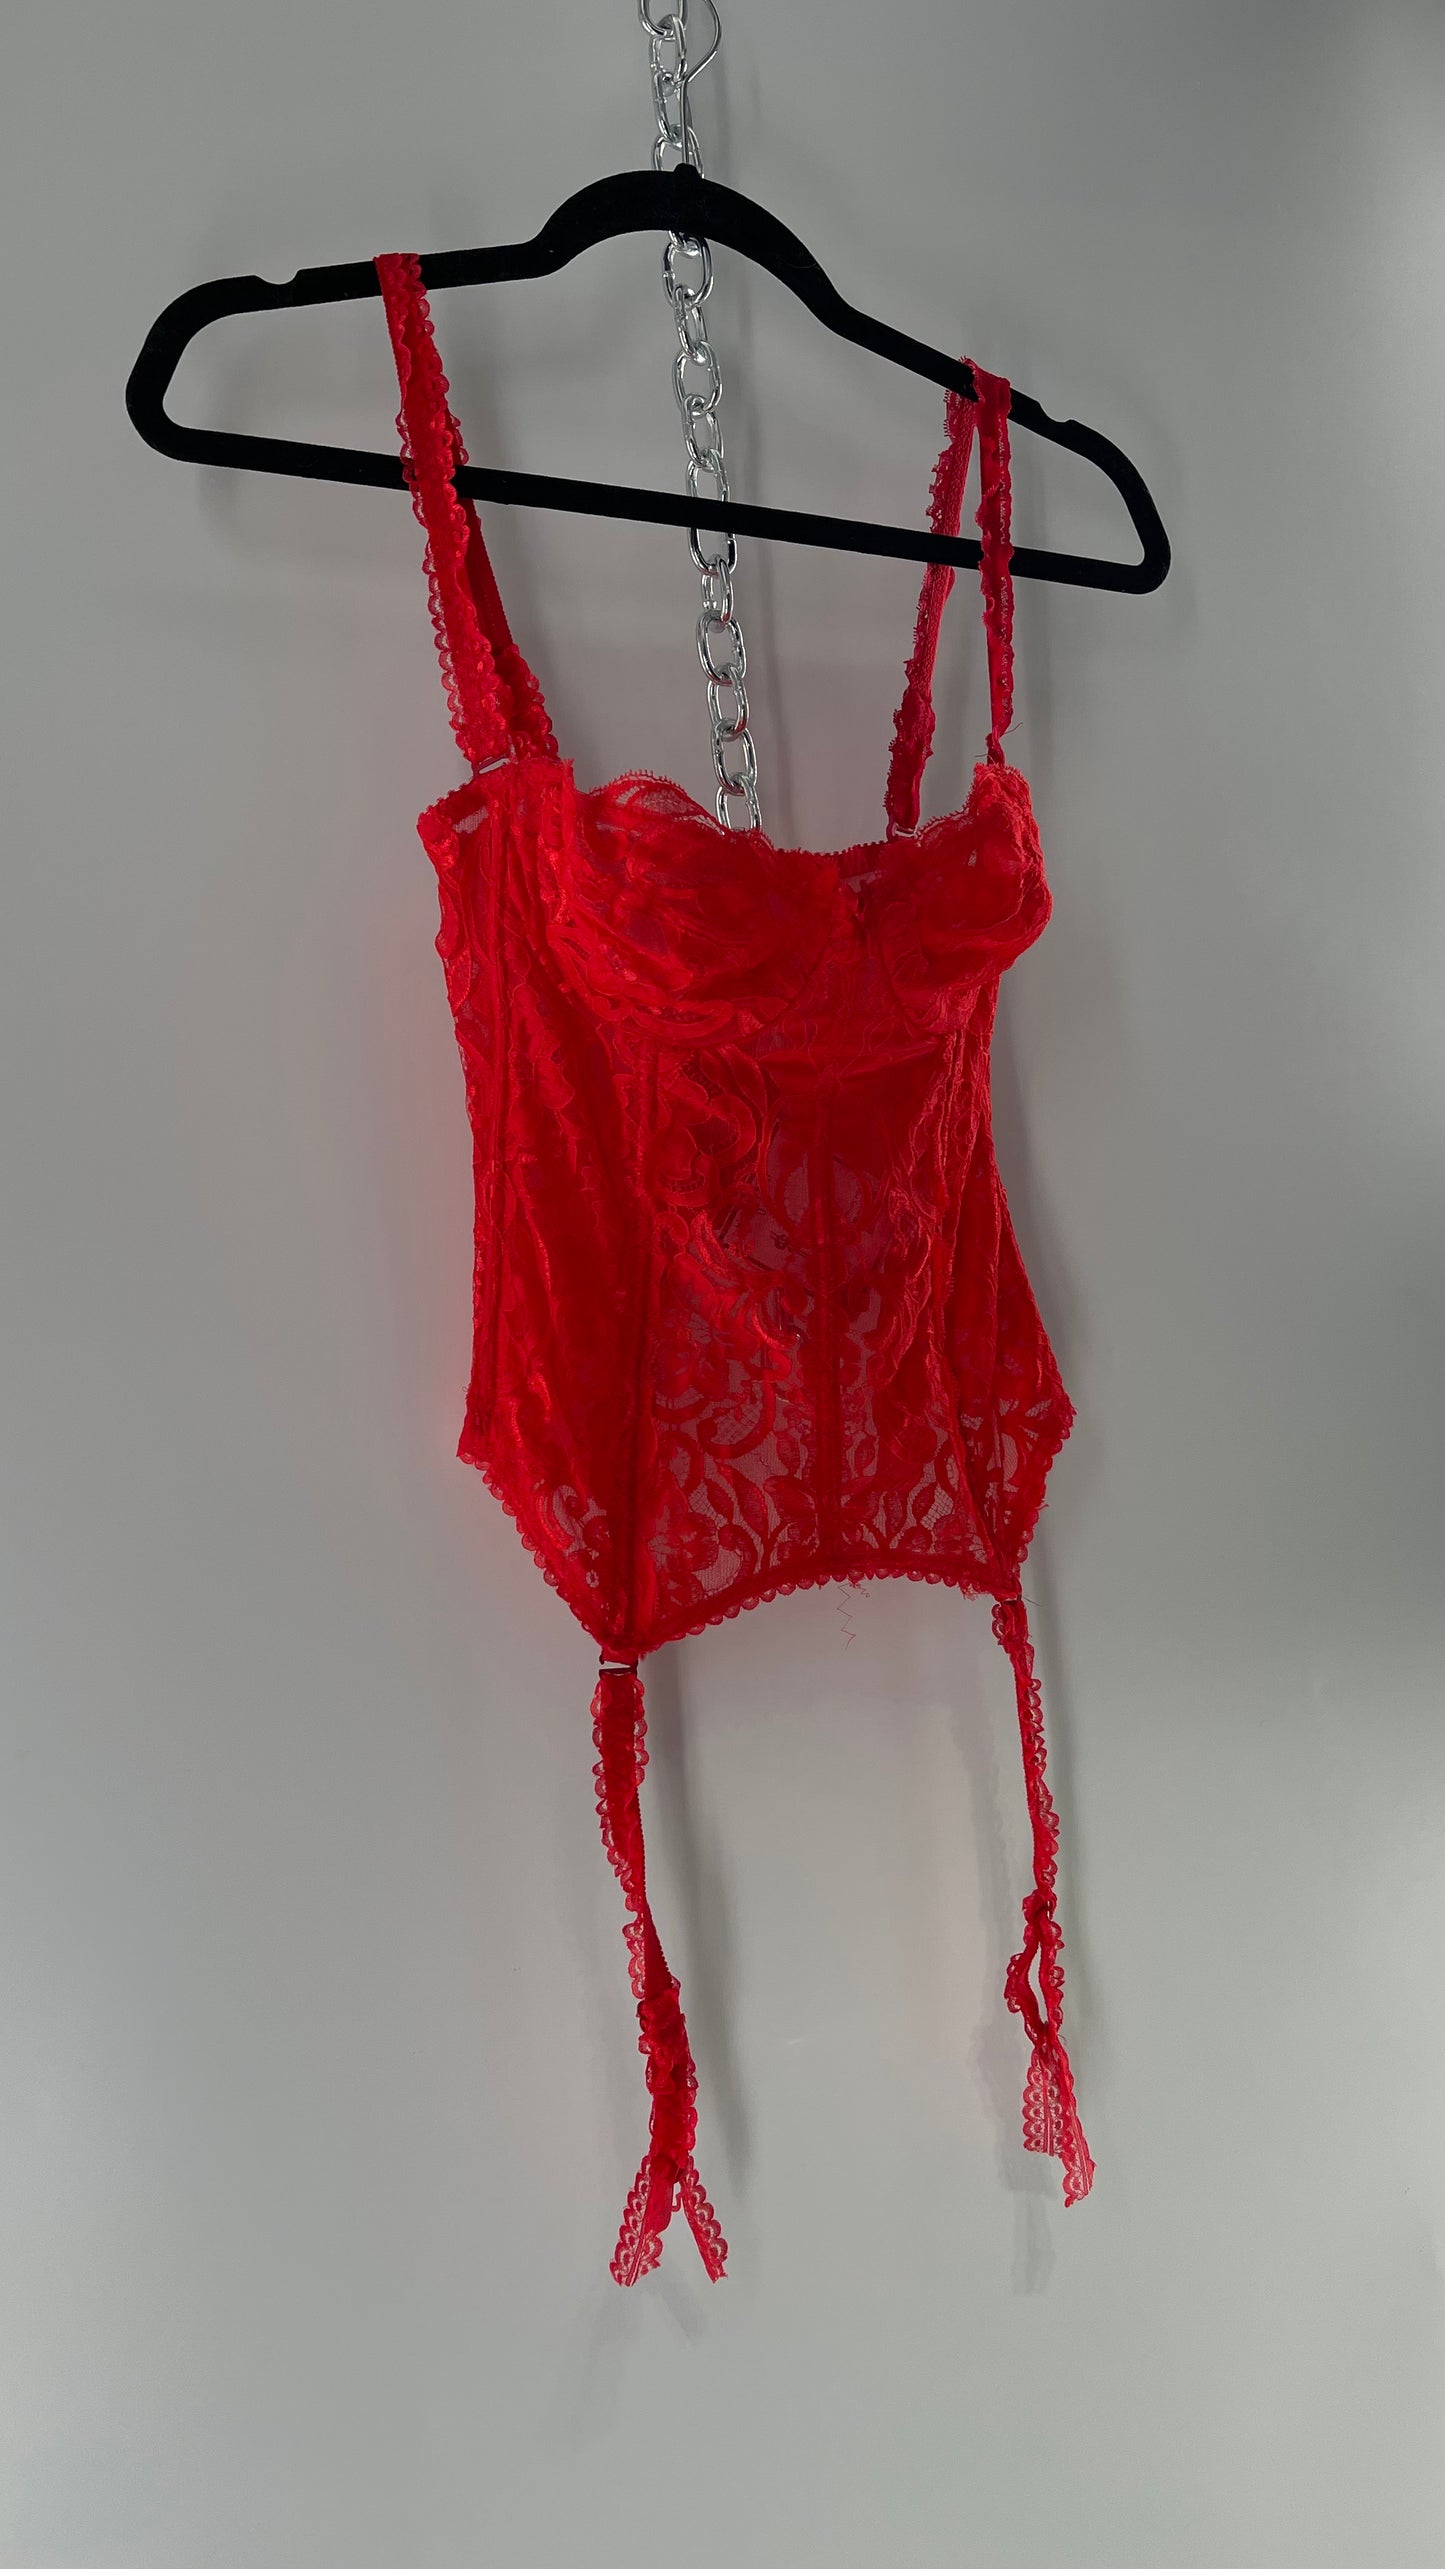 90s Vintage Red Lace Corset with Ruffled Sleeves and Removable Garter Straps (32B)